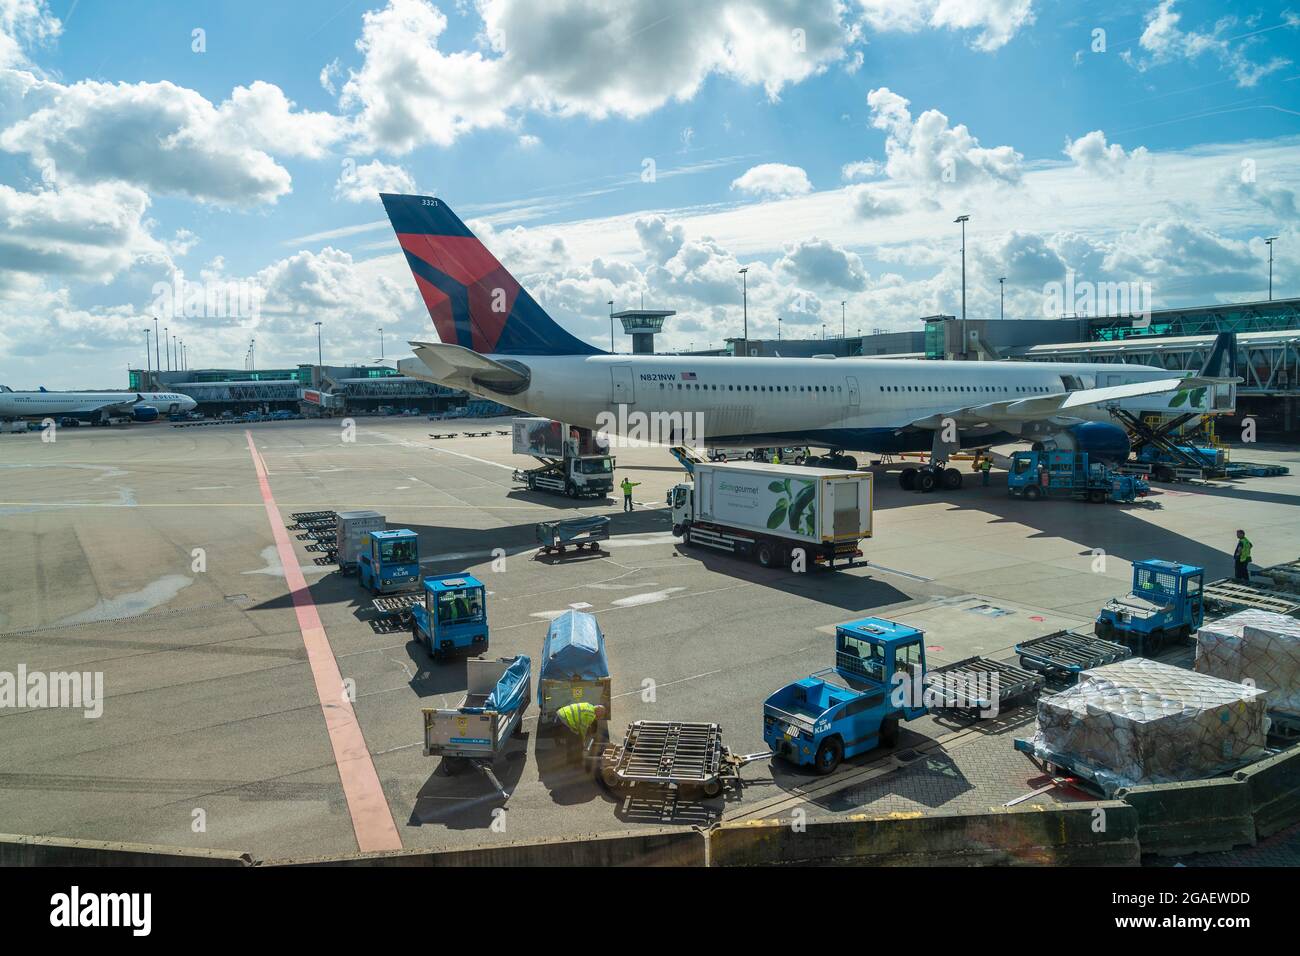 Amsterdam, the Netherlands - July 29, 2021: Aircraft by Delta Airline seen at Shiphol airport. Fully vaccinated travelers are allowed to travel during pandemic but required to wear masks at airports and while on aircrafts. Stock Photo